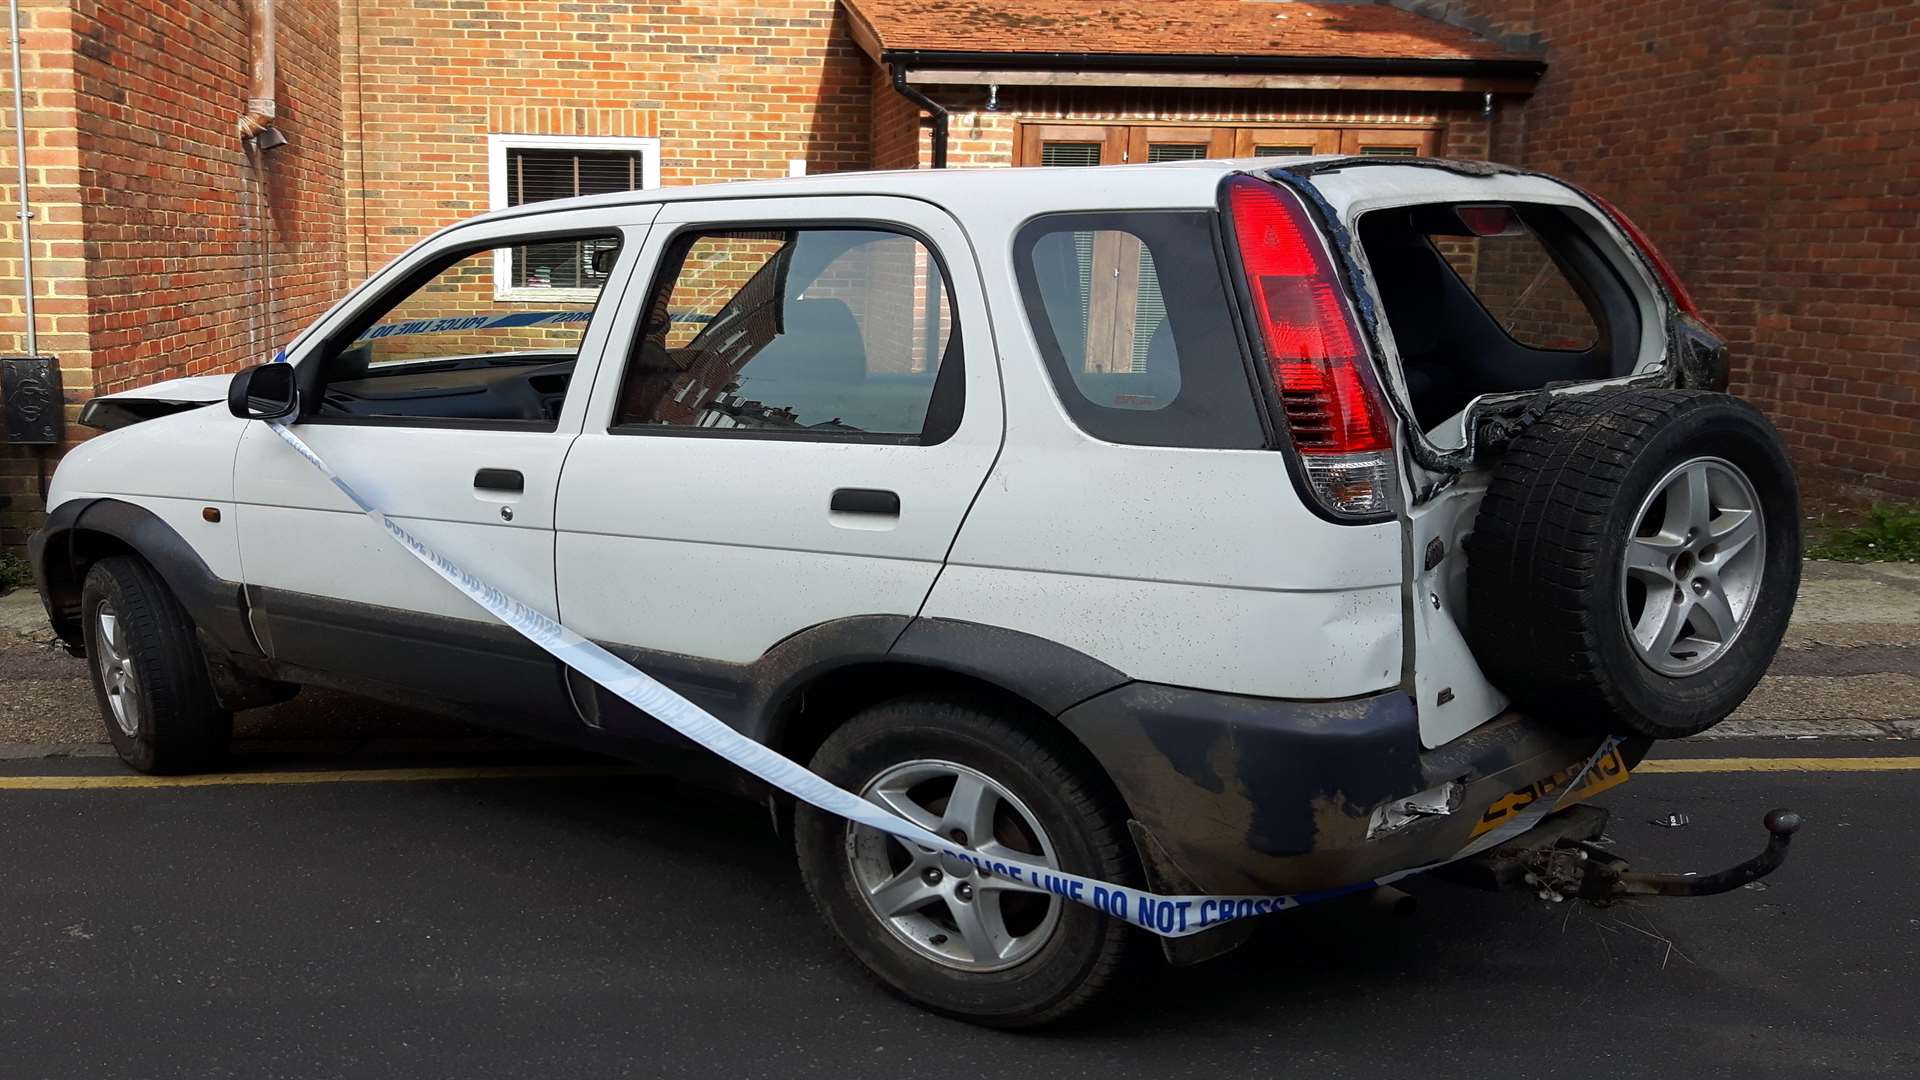 A battered white Daihatsu Terios was abandoned on Dover Street in Canterbury.